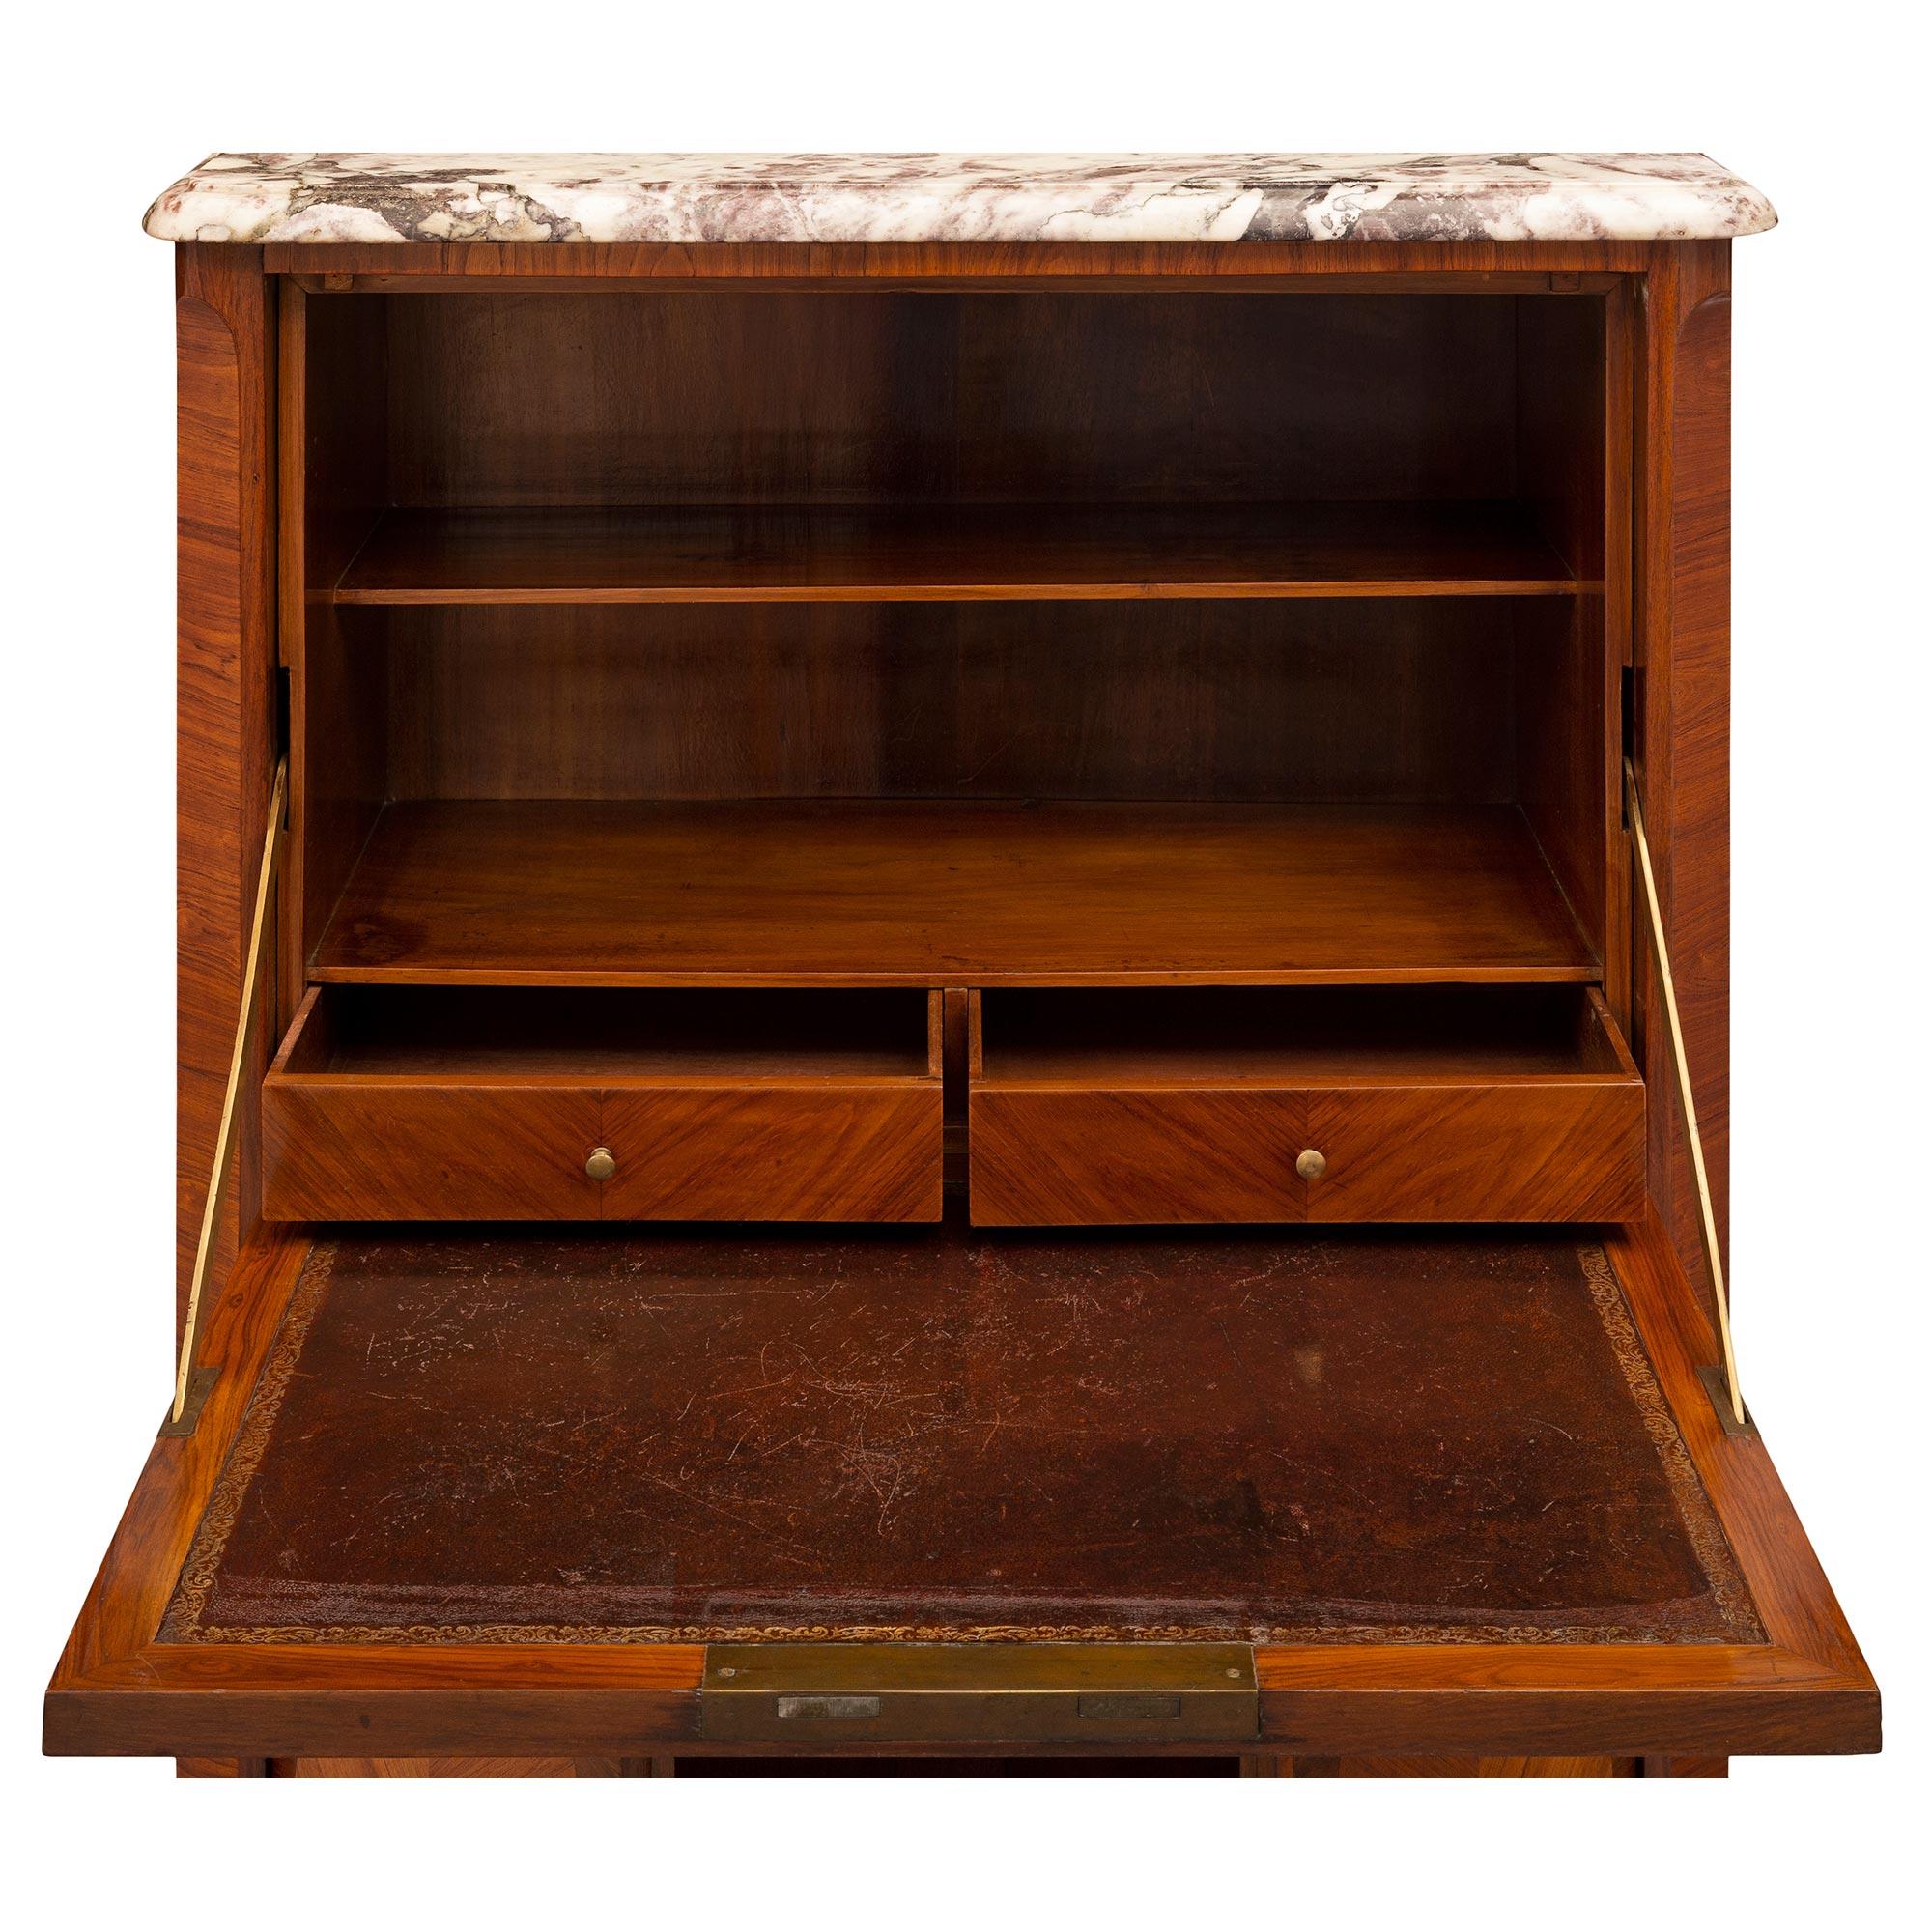 French Mid 19th Century Transitional St. Kingwood, Marble, and Ormolu Secretary For Sale 1